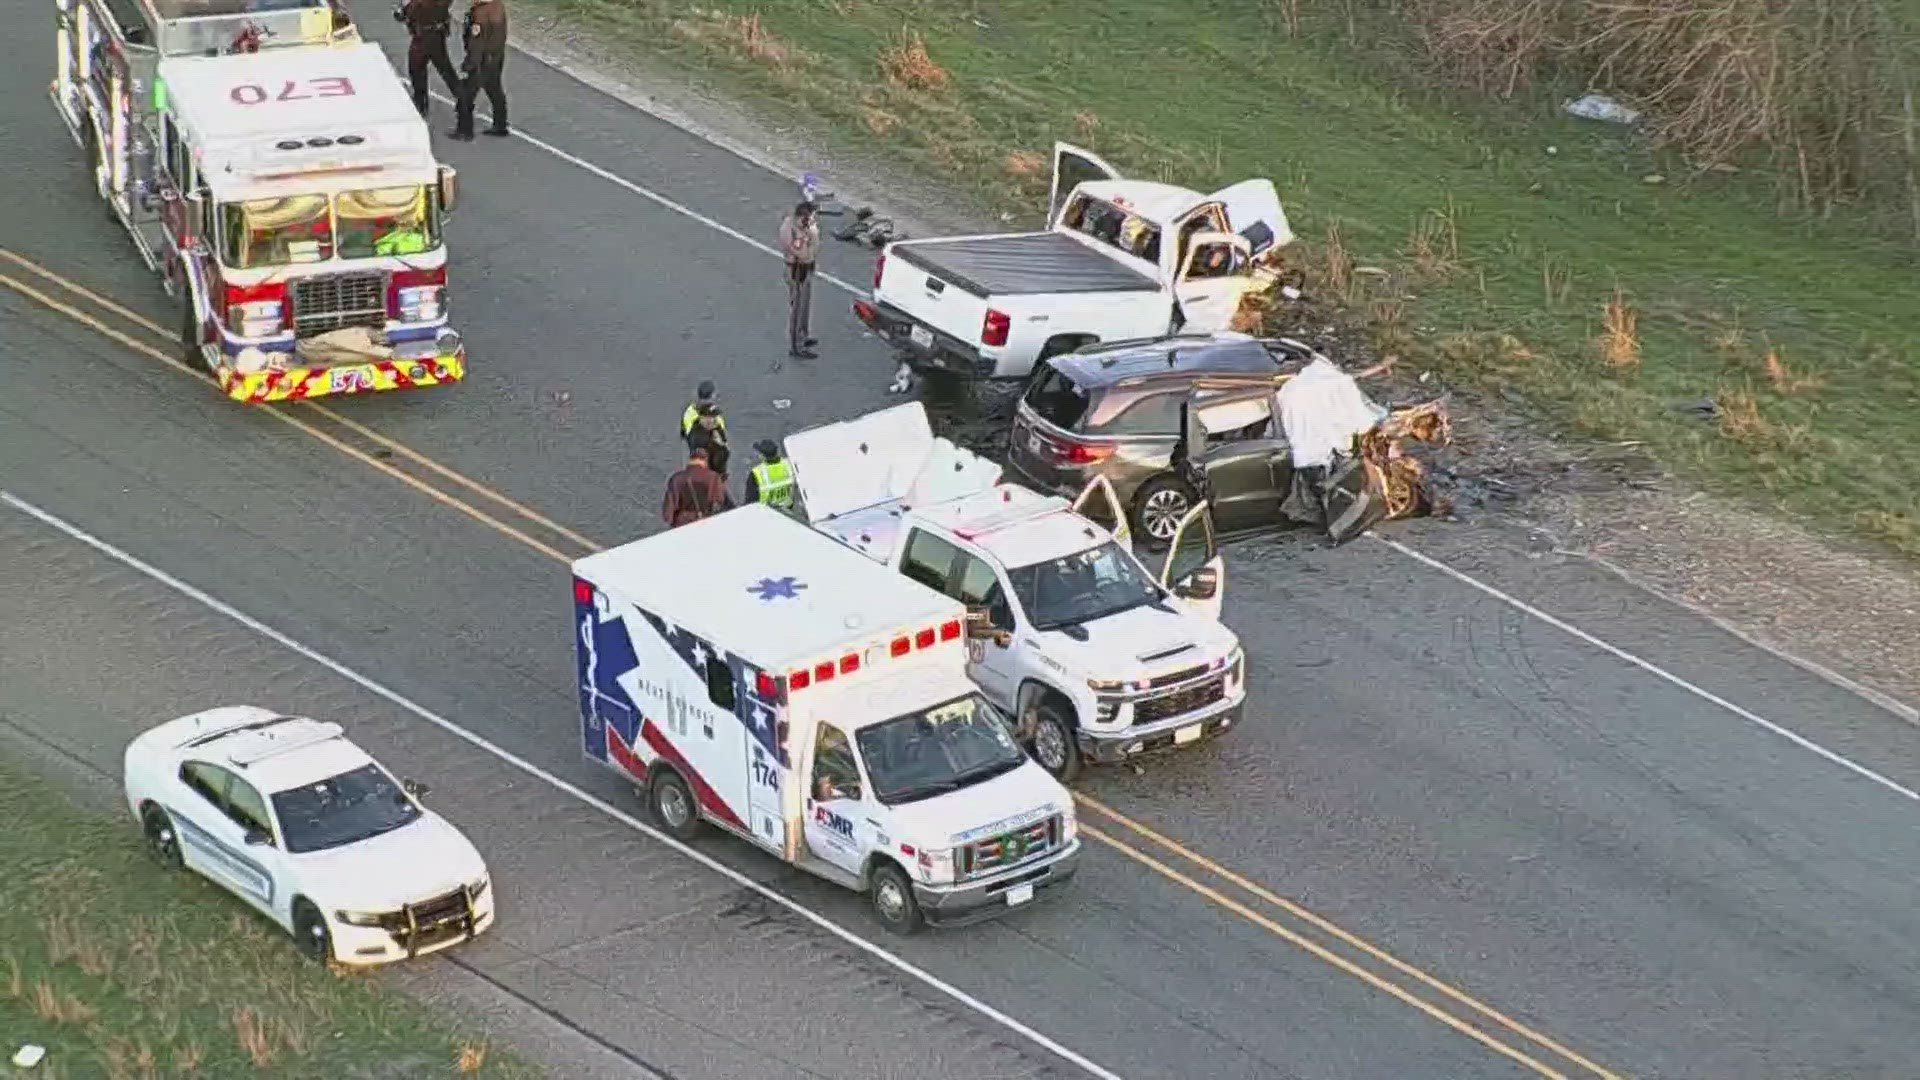 Johnson County deputies said at least six people were killed, and three more seriously injured, in a two-vehicle crash on Tuesday evening.